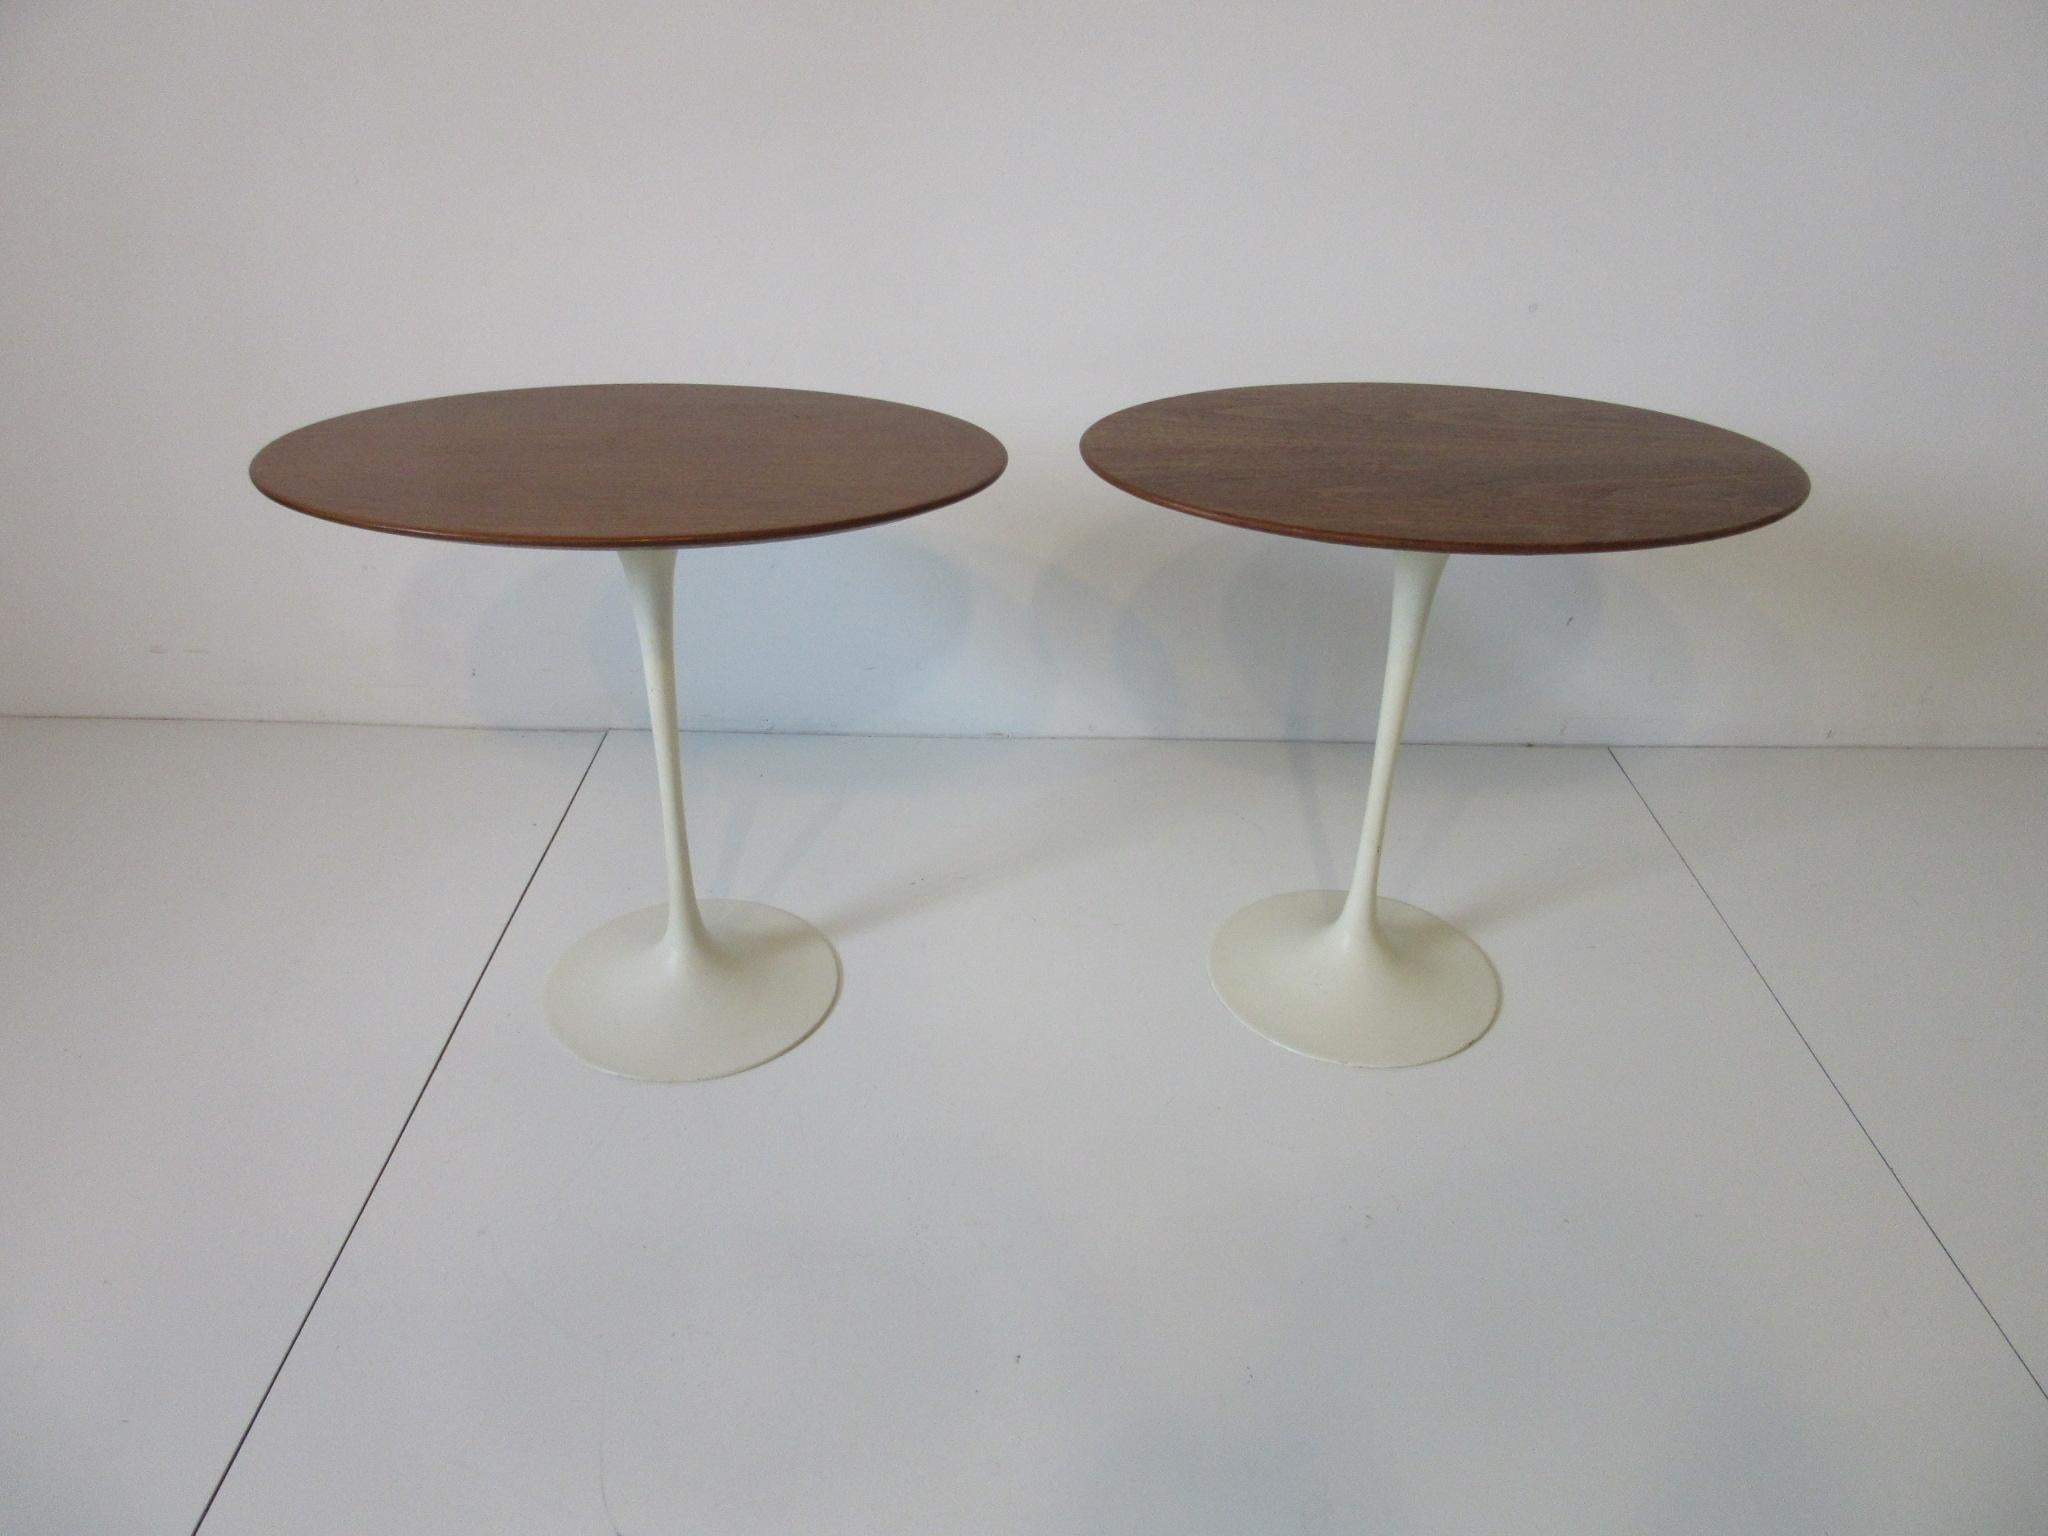 A matching pair of Eero Saarinen designed side tables with oval walnut tops and creamy white cast bases. Retains the manufactures label Knoll -Park Ave, NY. NY and ink date stamped 1972. A pair that are matched from birth are hard to find since they